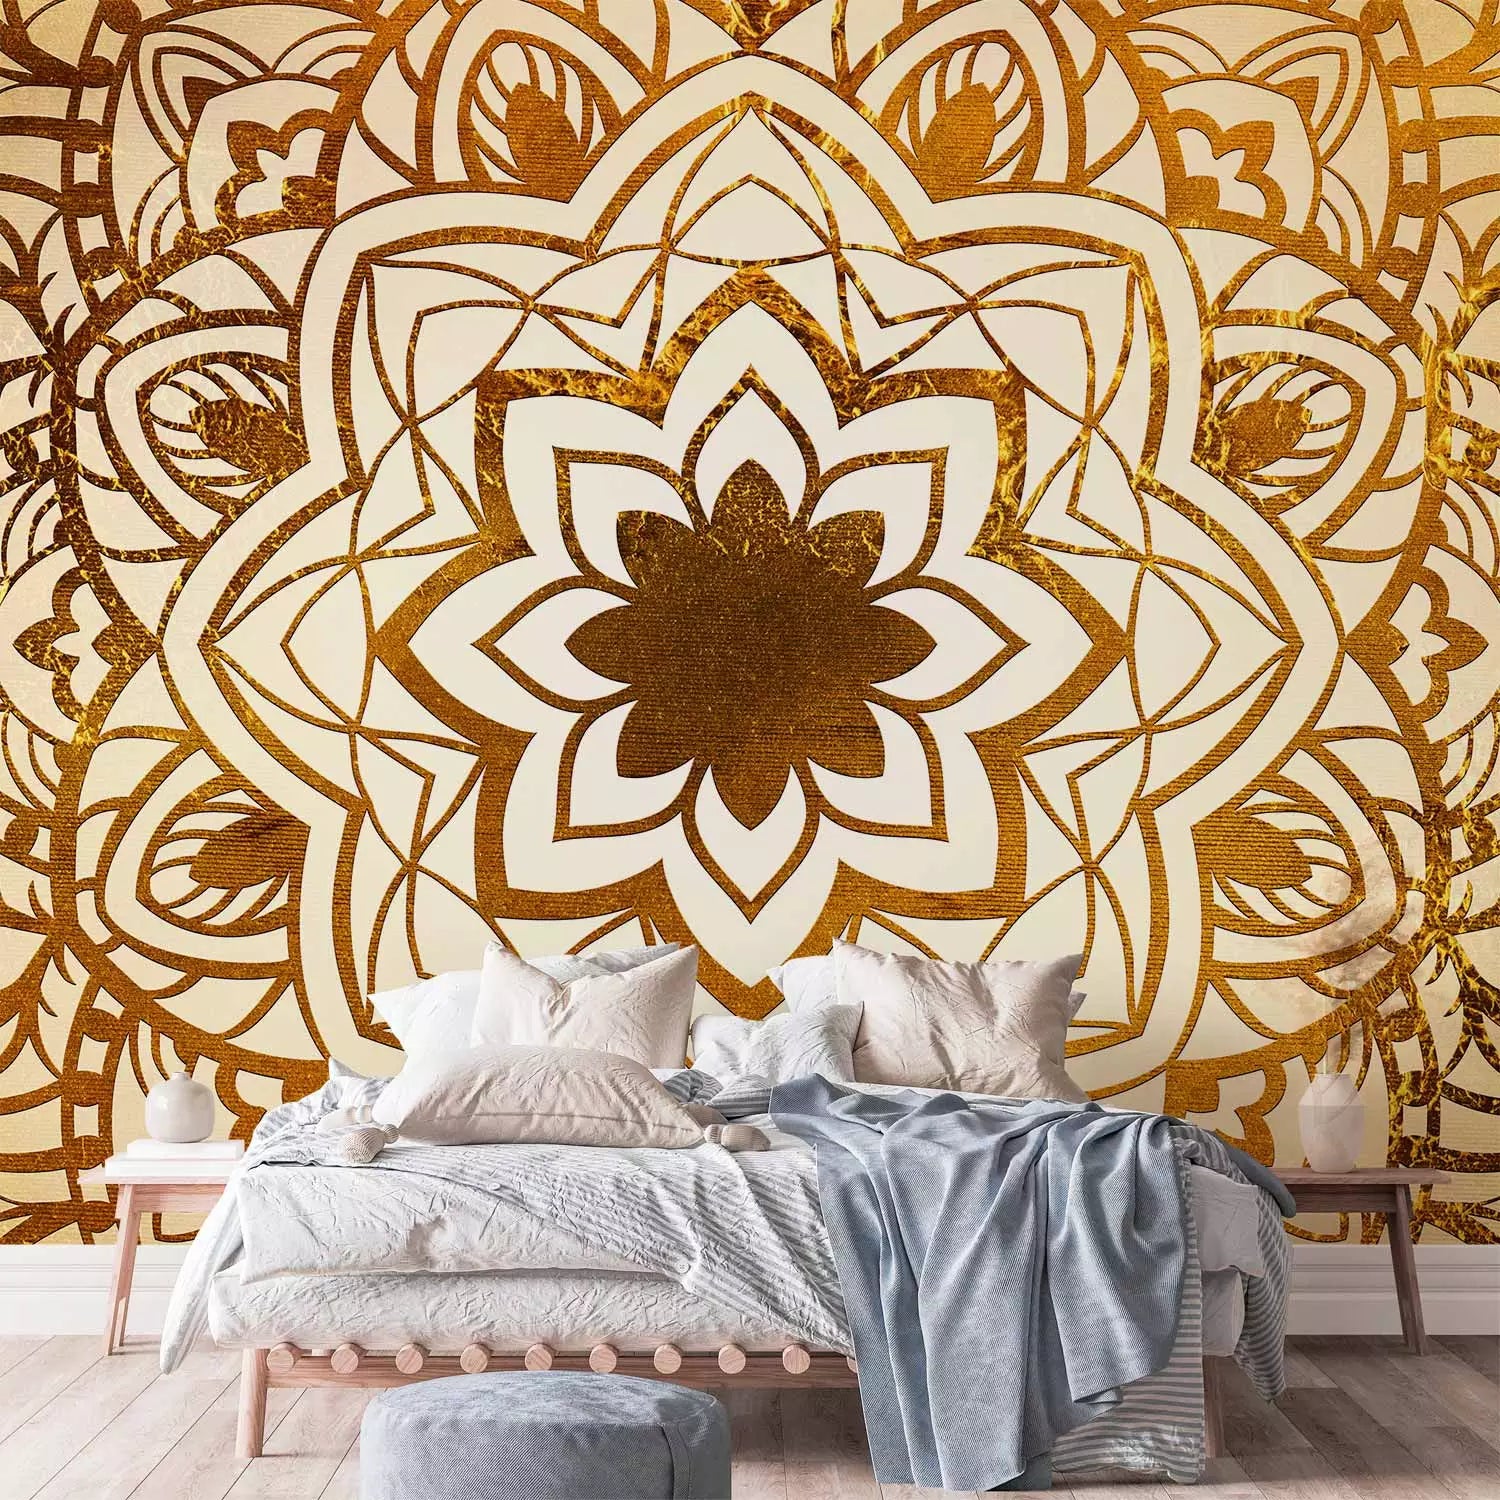 a stunning oriental mandala in shades of beige and brown in the bedroom